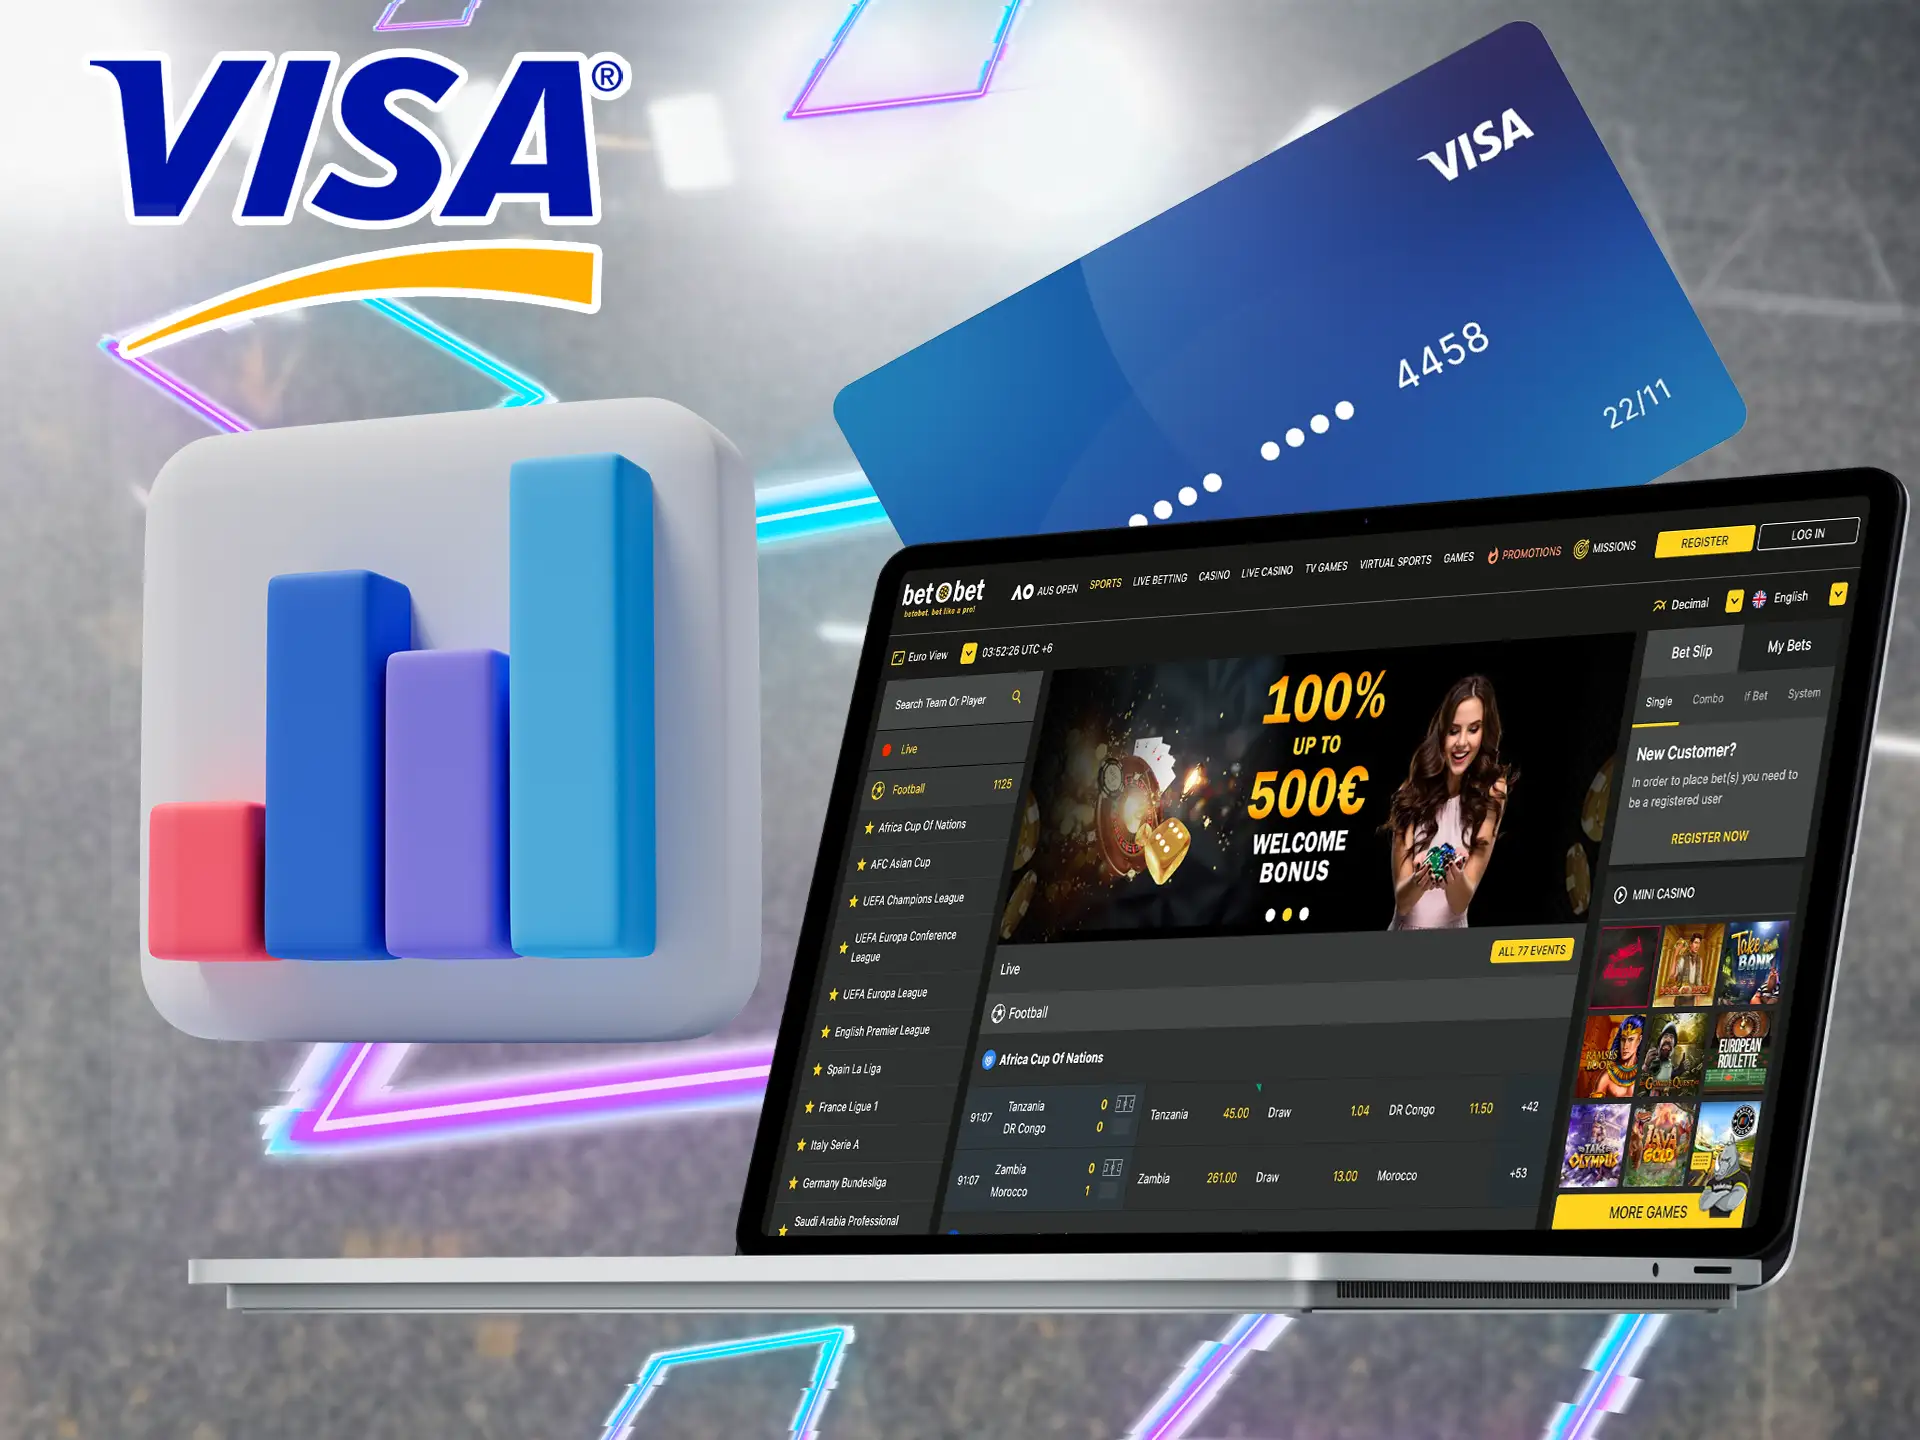 This is a very popular card, you can use it to top up any of the betting sites listed in our article.